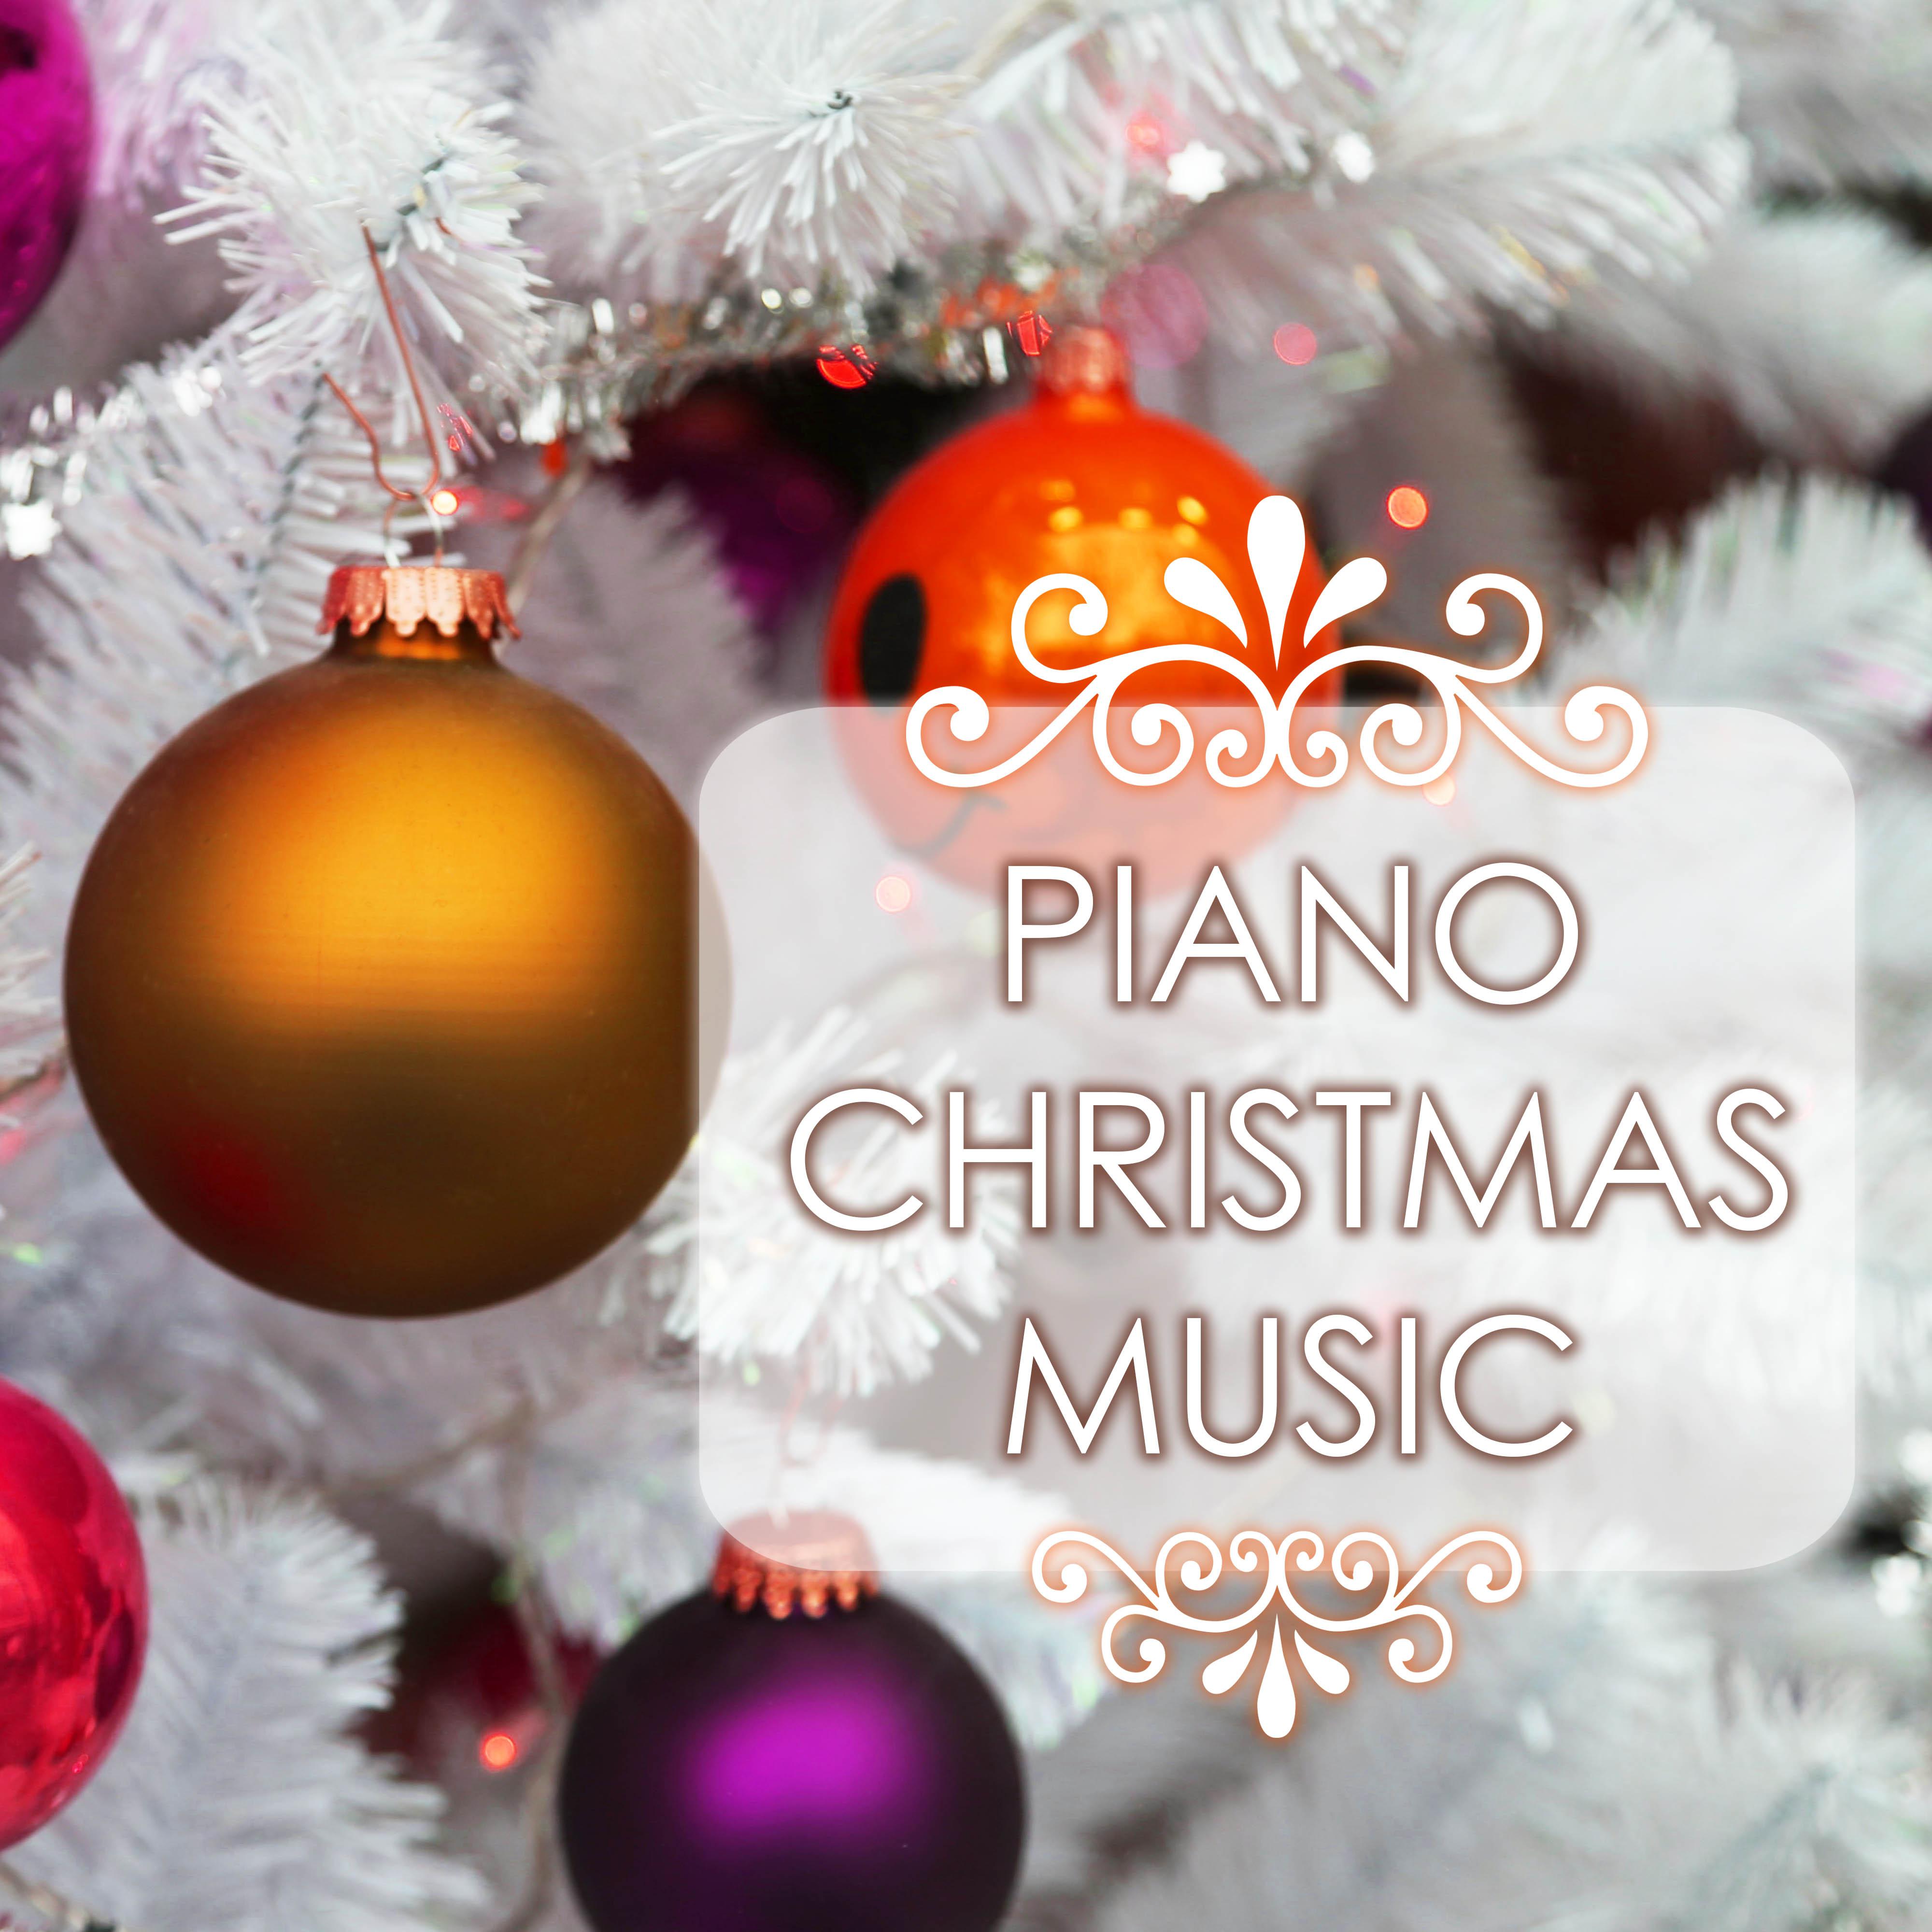 Piano Christmas Music - The Best Background Songs for Your Holidays